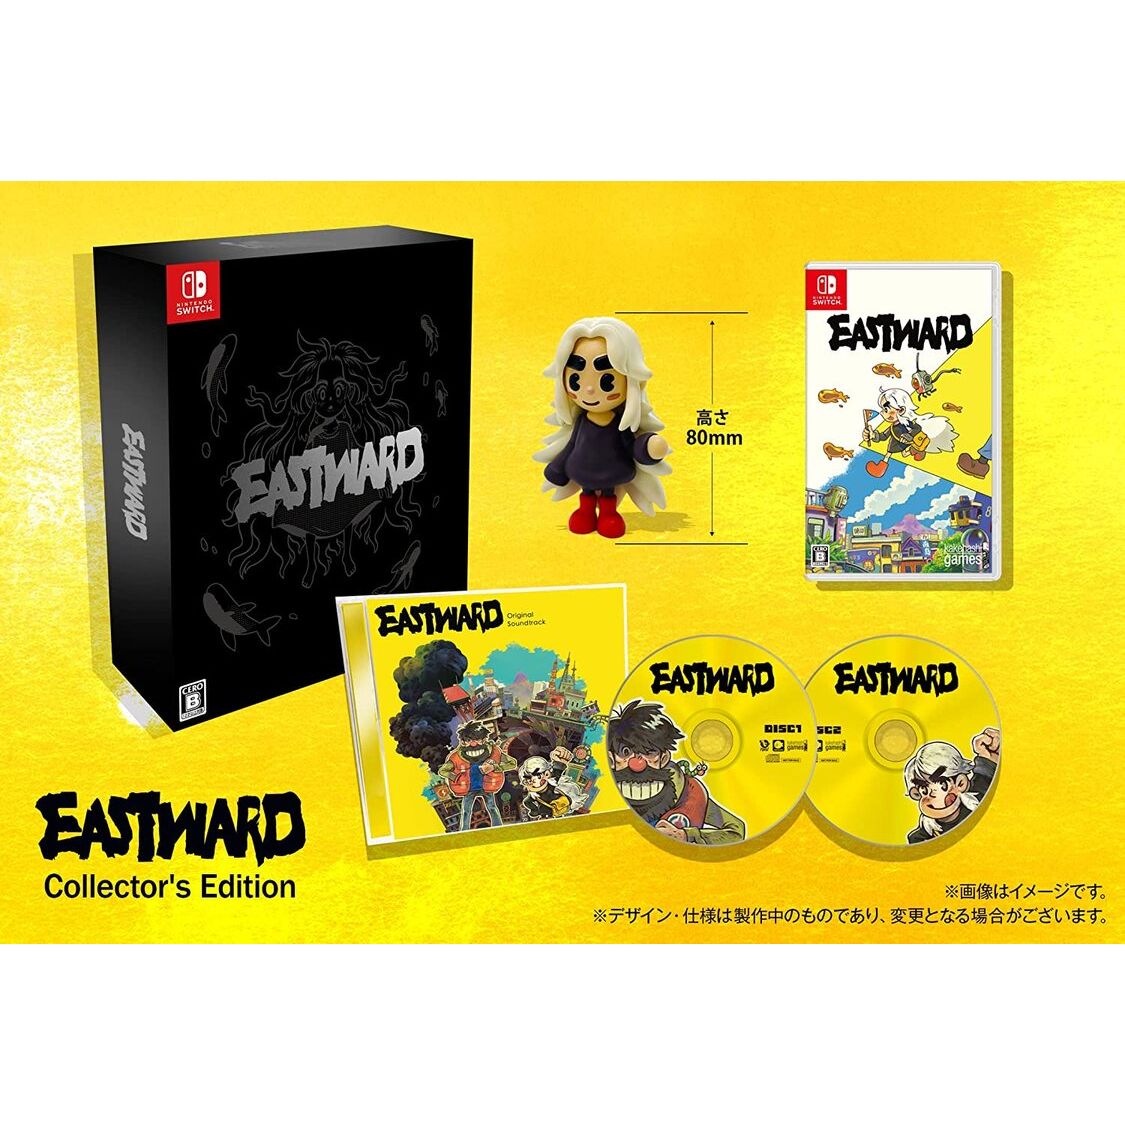 Eastward Collector's Edition NSW (Japan Import)